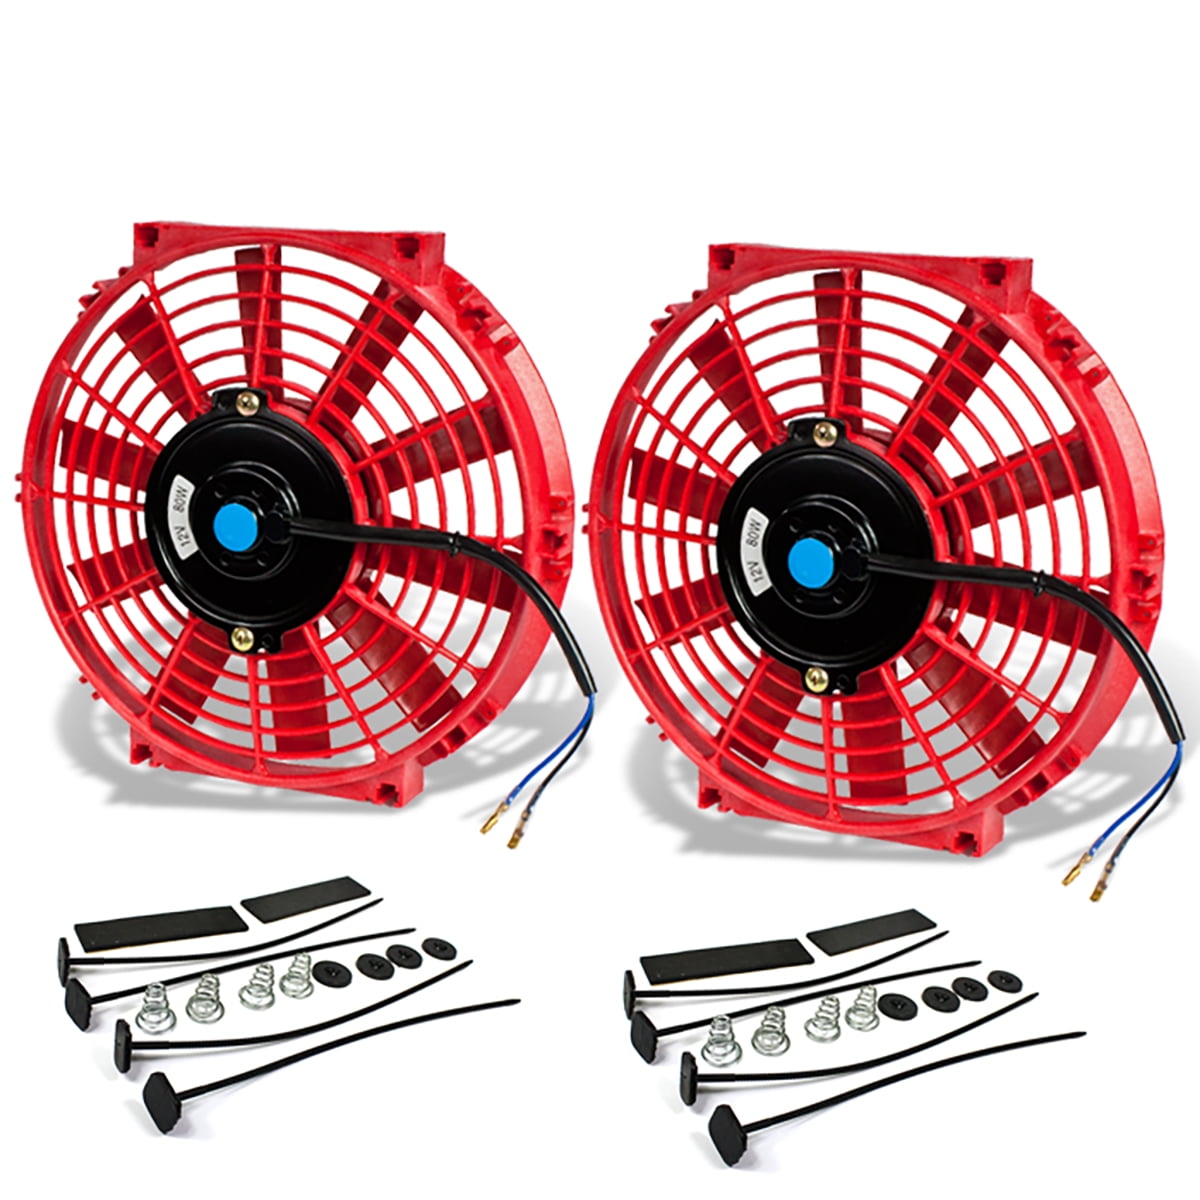 10 Inch High Performance 12V Electric Slim Radiator Cooling Fan w/Mounting Kit Pack of 1 Red 